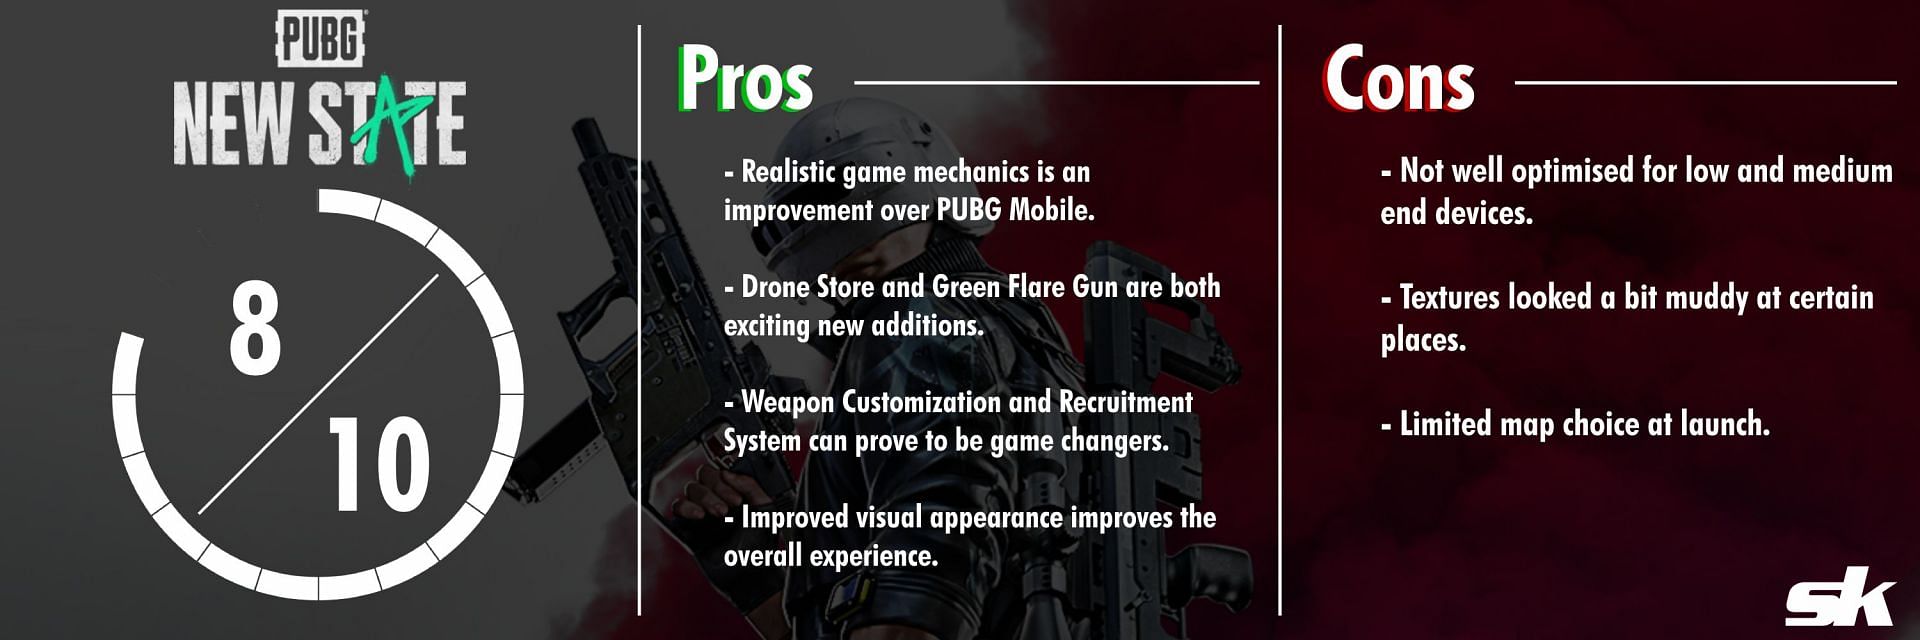 Pros and cons of PUBG New State (Image via Sportskeeda)